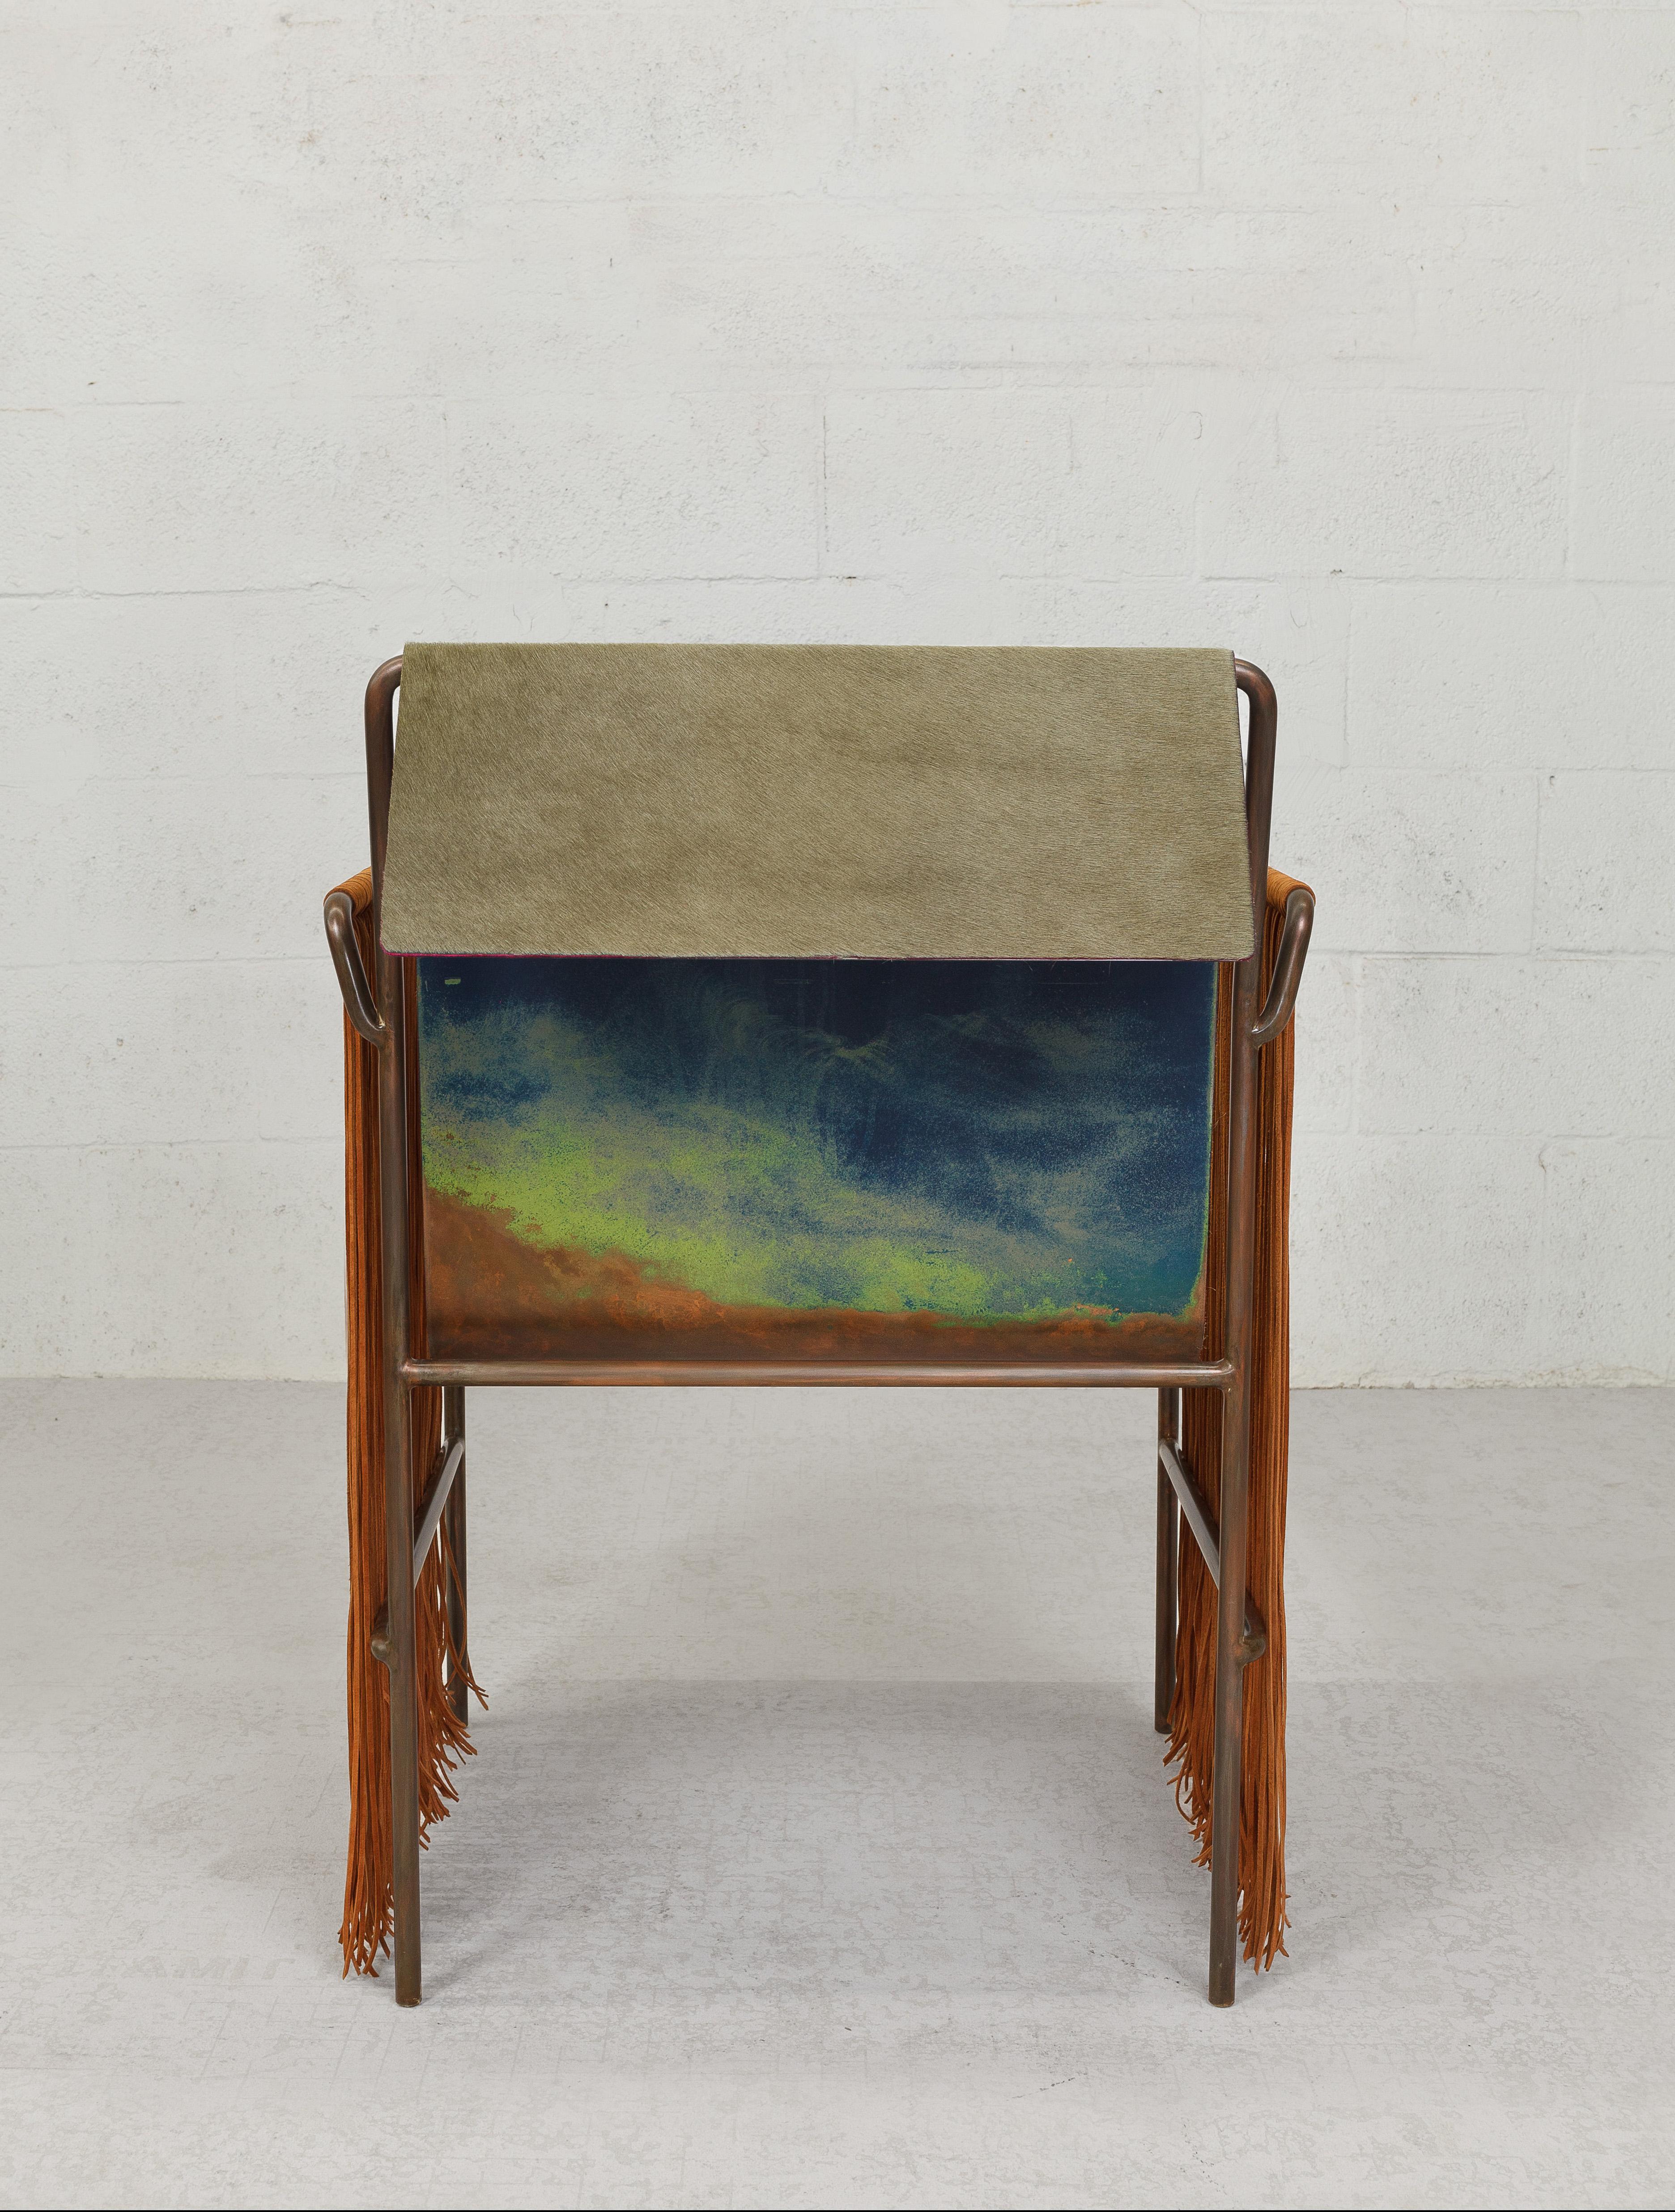 Contemporary Tribal Arm Chair in Patinated Steel and Leather by Vivian Carbonell For Sale 3